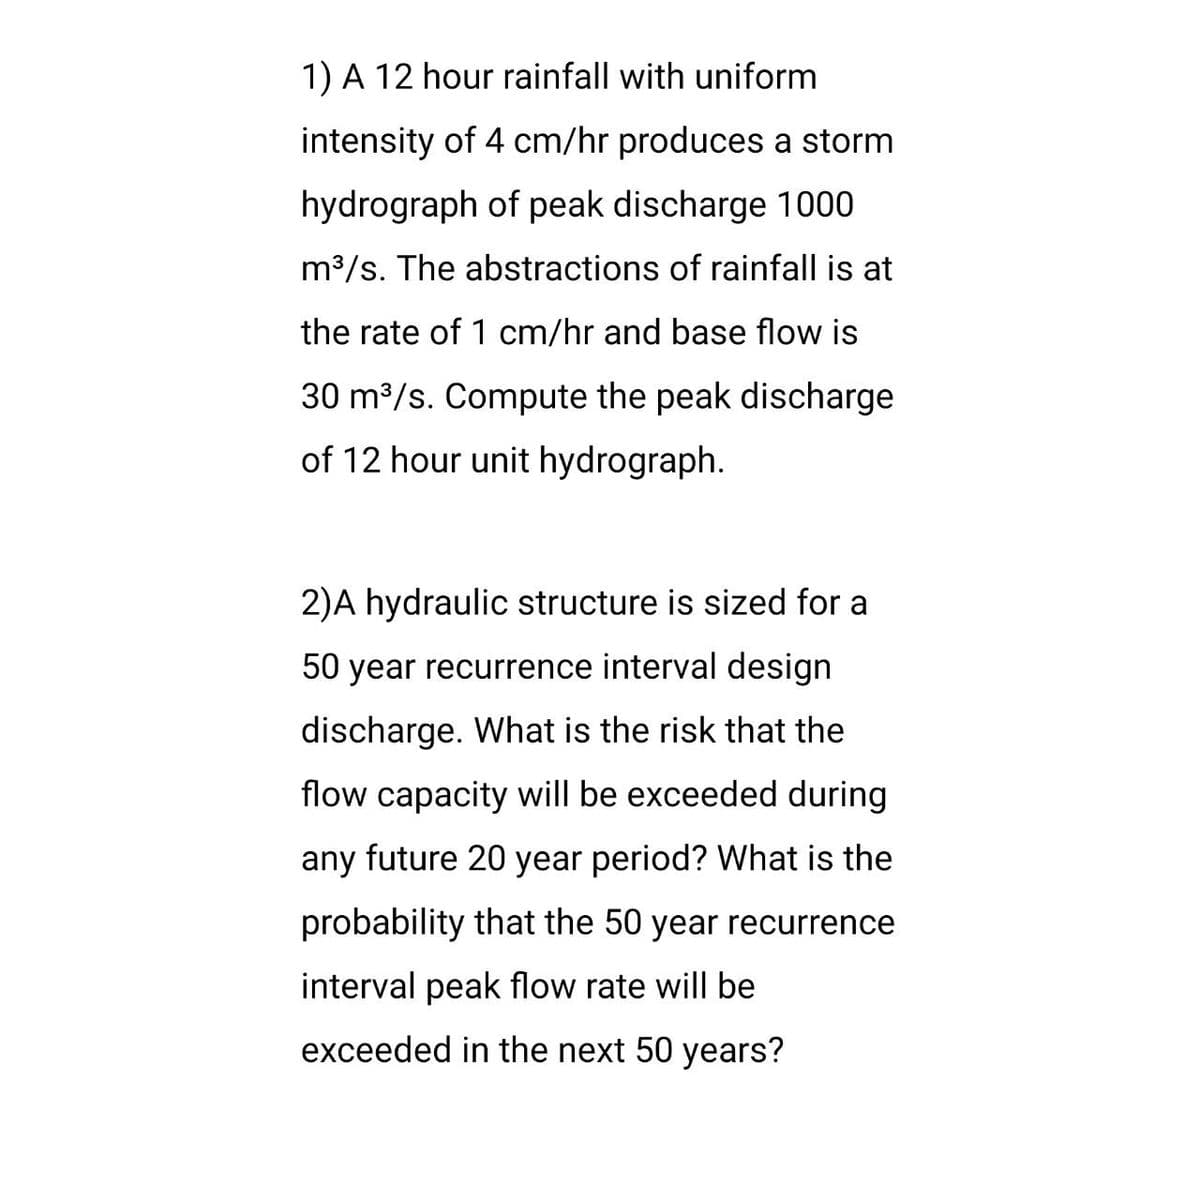 1) A 12 hour rainfall with uniform
intensity of 4 cm/hr produces a storm
hydrograph of peak discharge 1000
m³/s. The abstractions of rainfall is at
the rate of 1 cm/hr and base flow is
30 m³/s. Compute the peak discharge
of 12 hour unit hydrograph.
2)A hydraulic structure is sized for a
50 year recurrence interval design
discharge. What is the risk that the
flow capacity will be exceeded during
any future 20 year period? What is the
probability that the 50 year recurrence
interval peak flow rate will be
exceeded in the next 50 years?